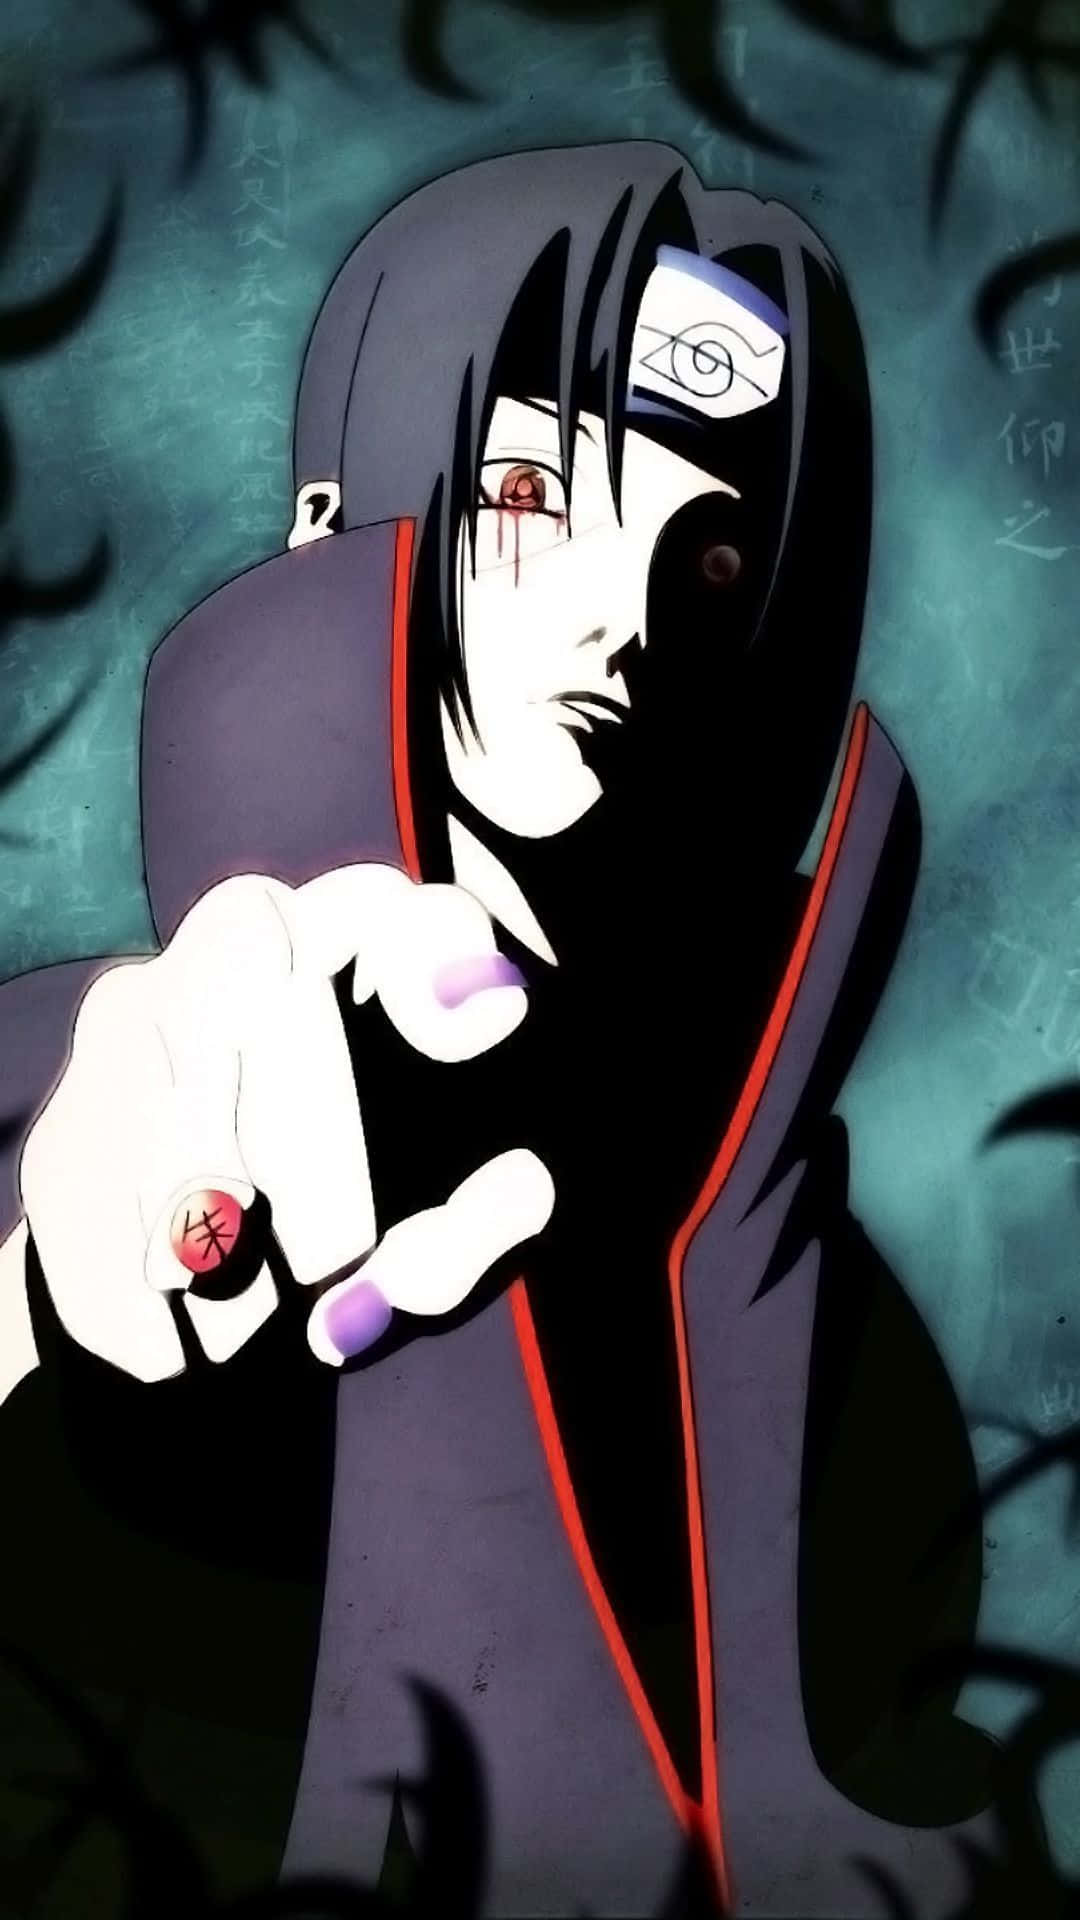 Itachi Aesthetic Pointing In Front With Sharingan Eyes And Uchiha Headband Wallpaper